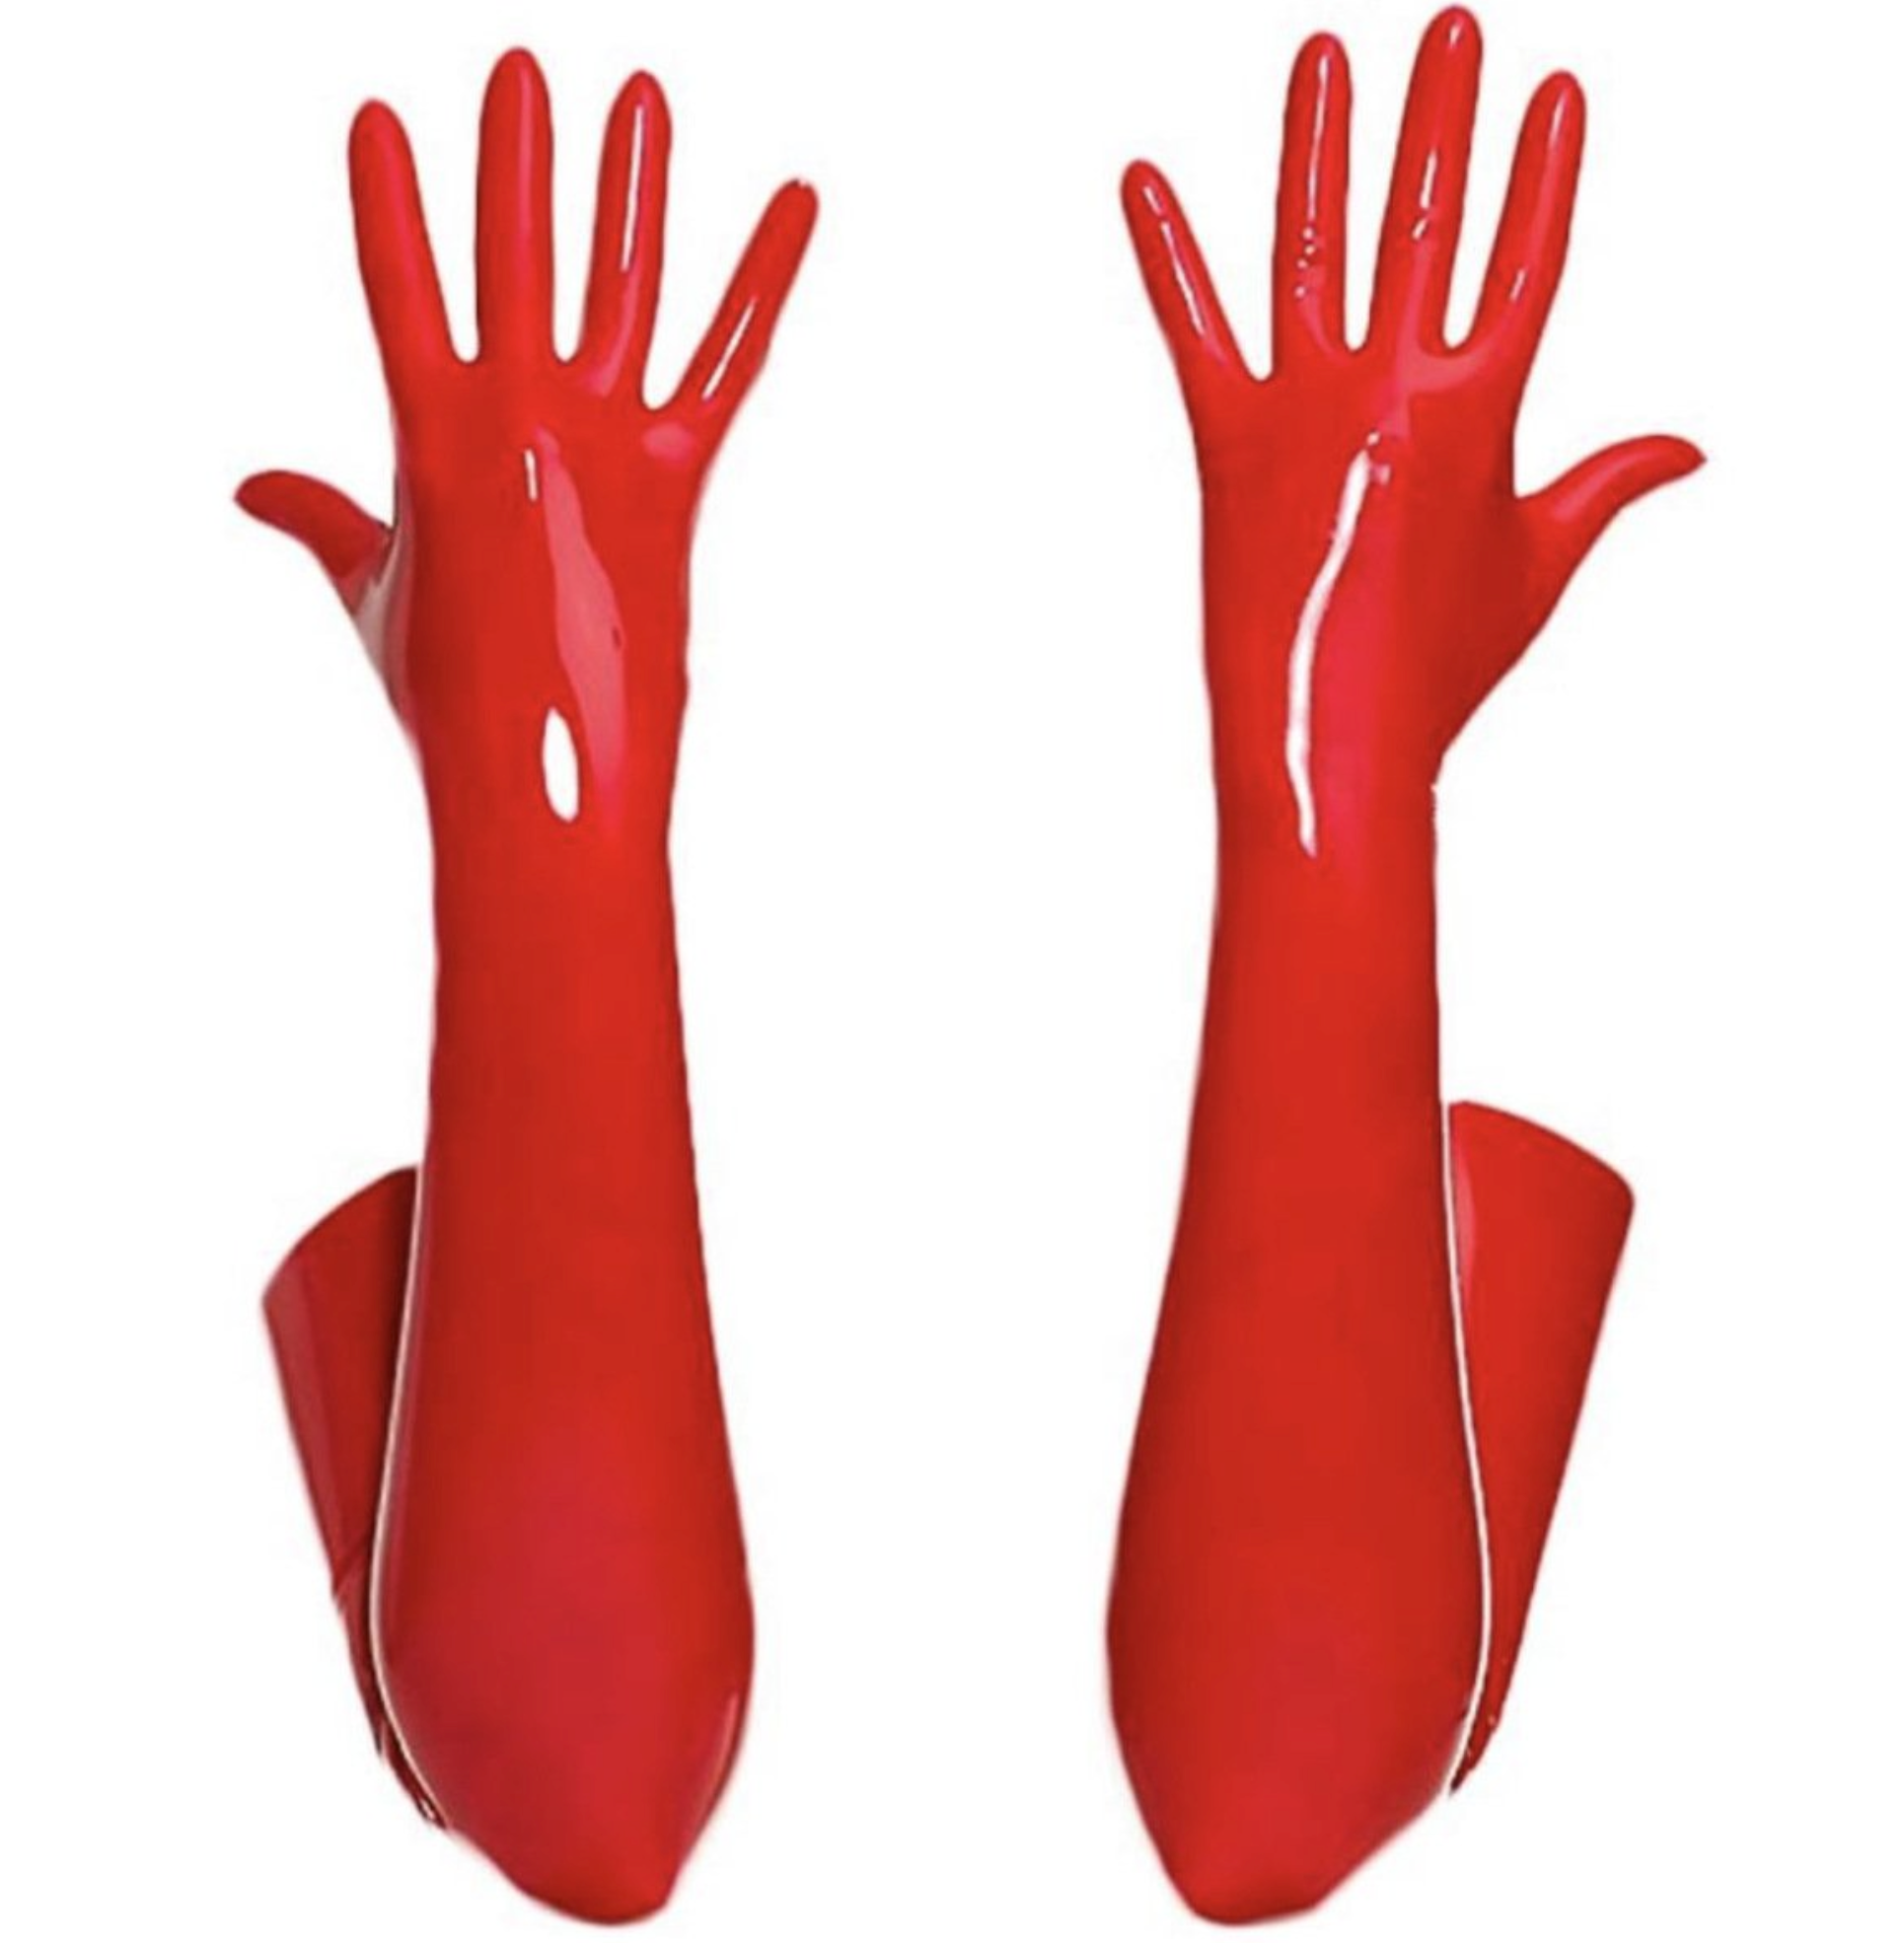 Long Liquid Gloves gloves LAVAH Red S/M 